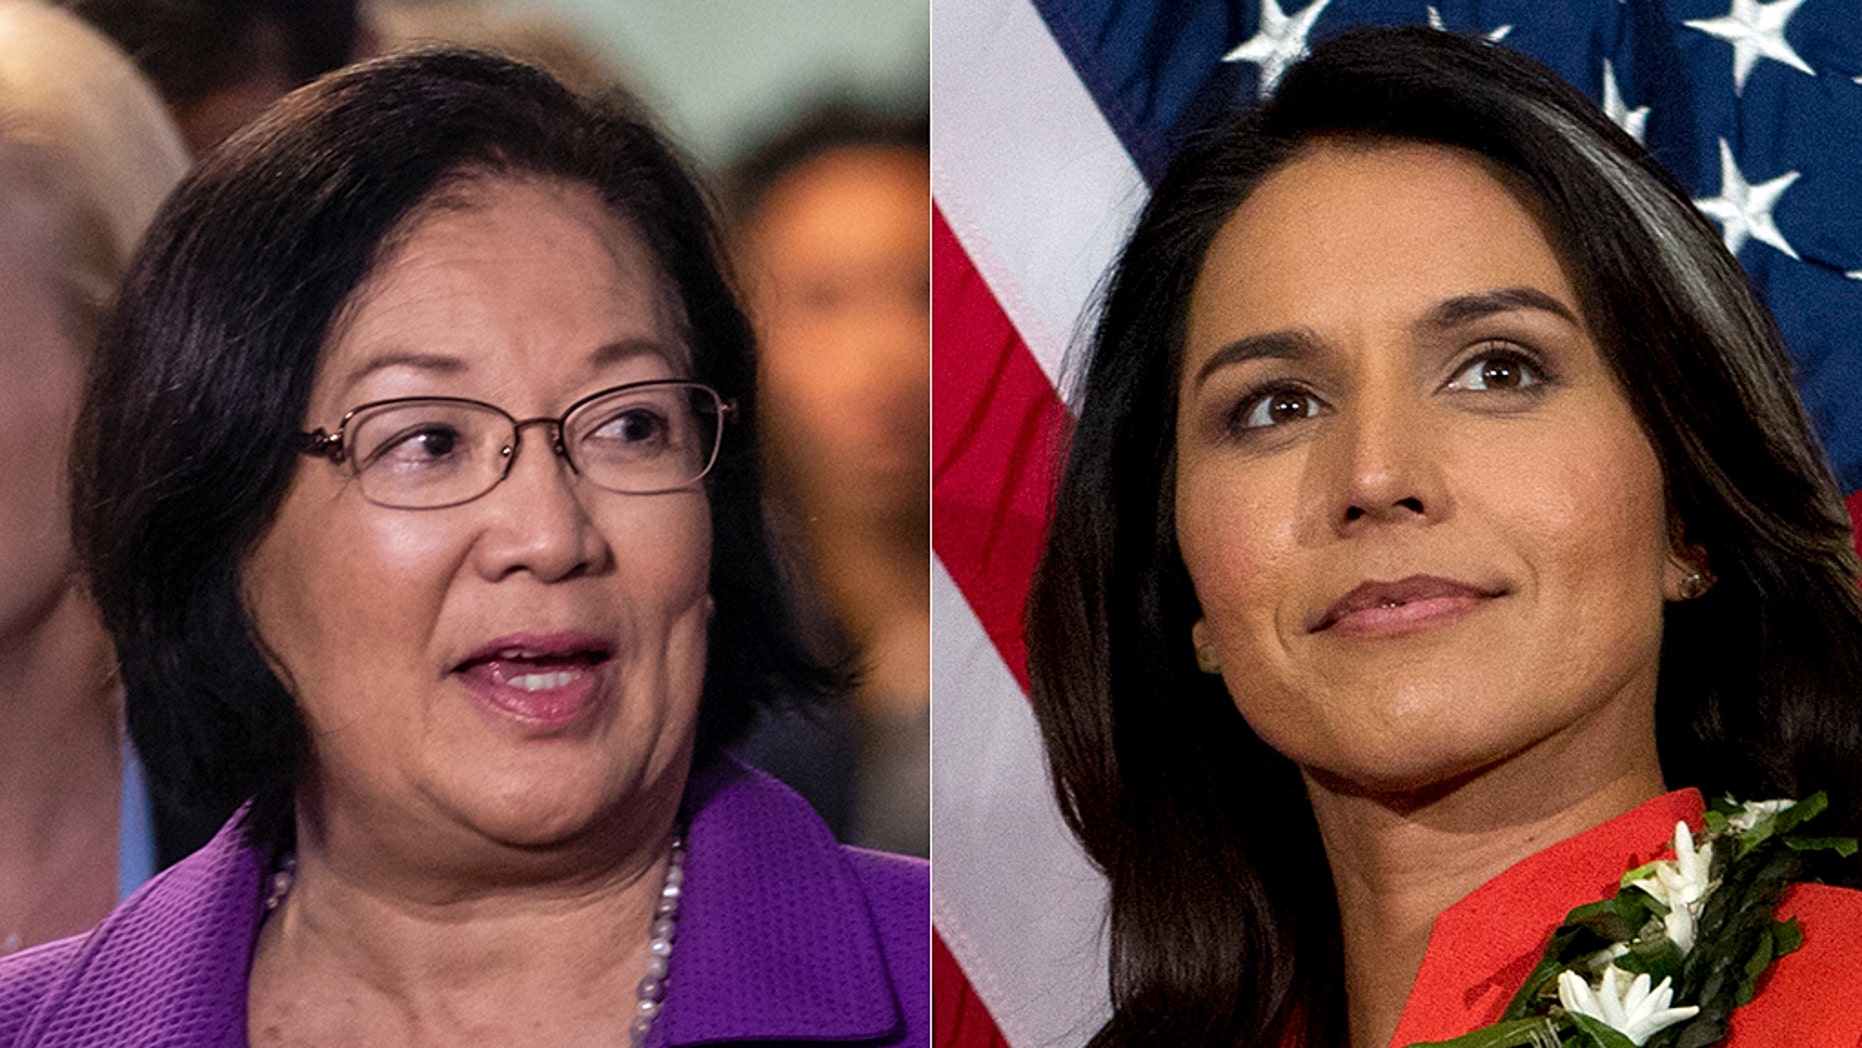 Rep. Gabbard accuses fellow Dems of stoking ‘bigotry’ for questioning court pick